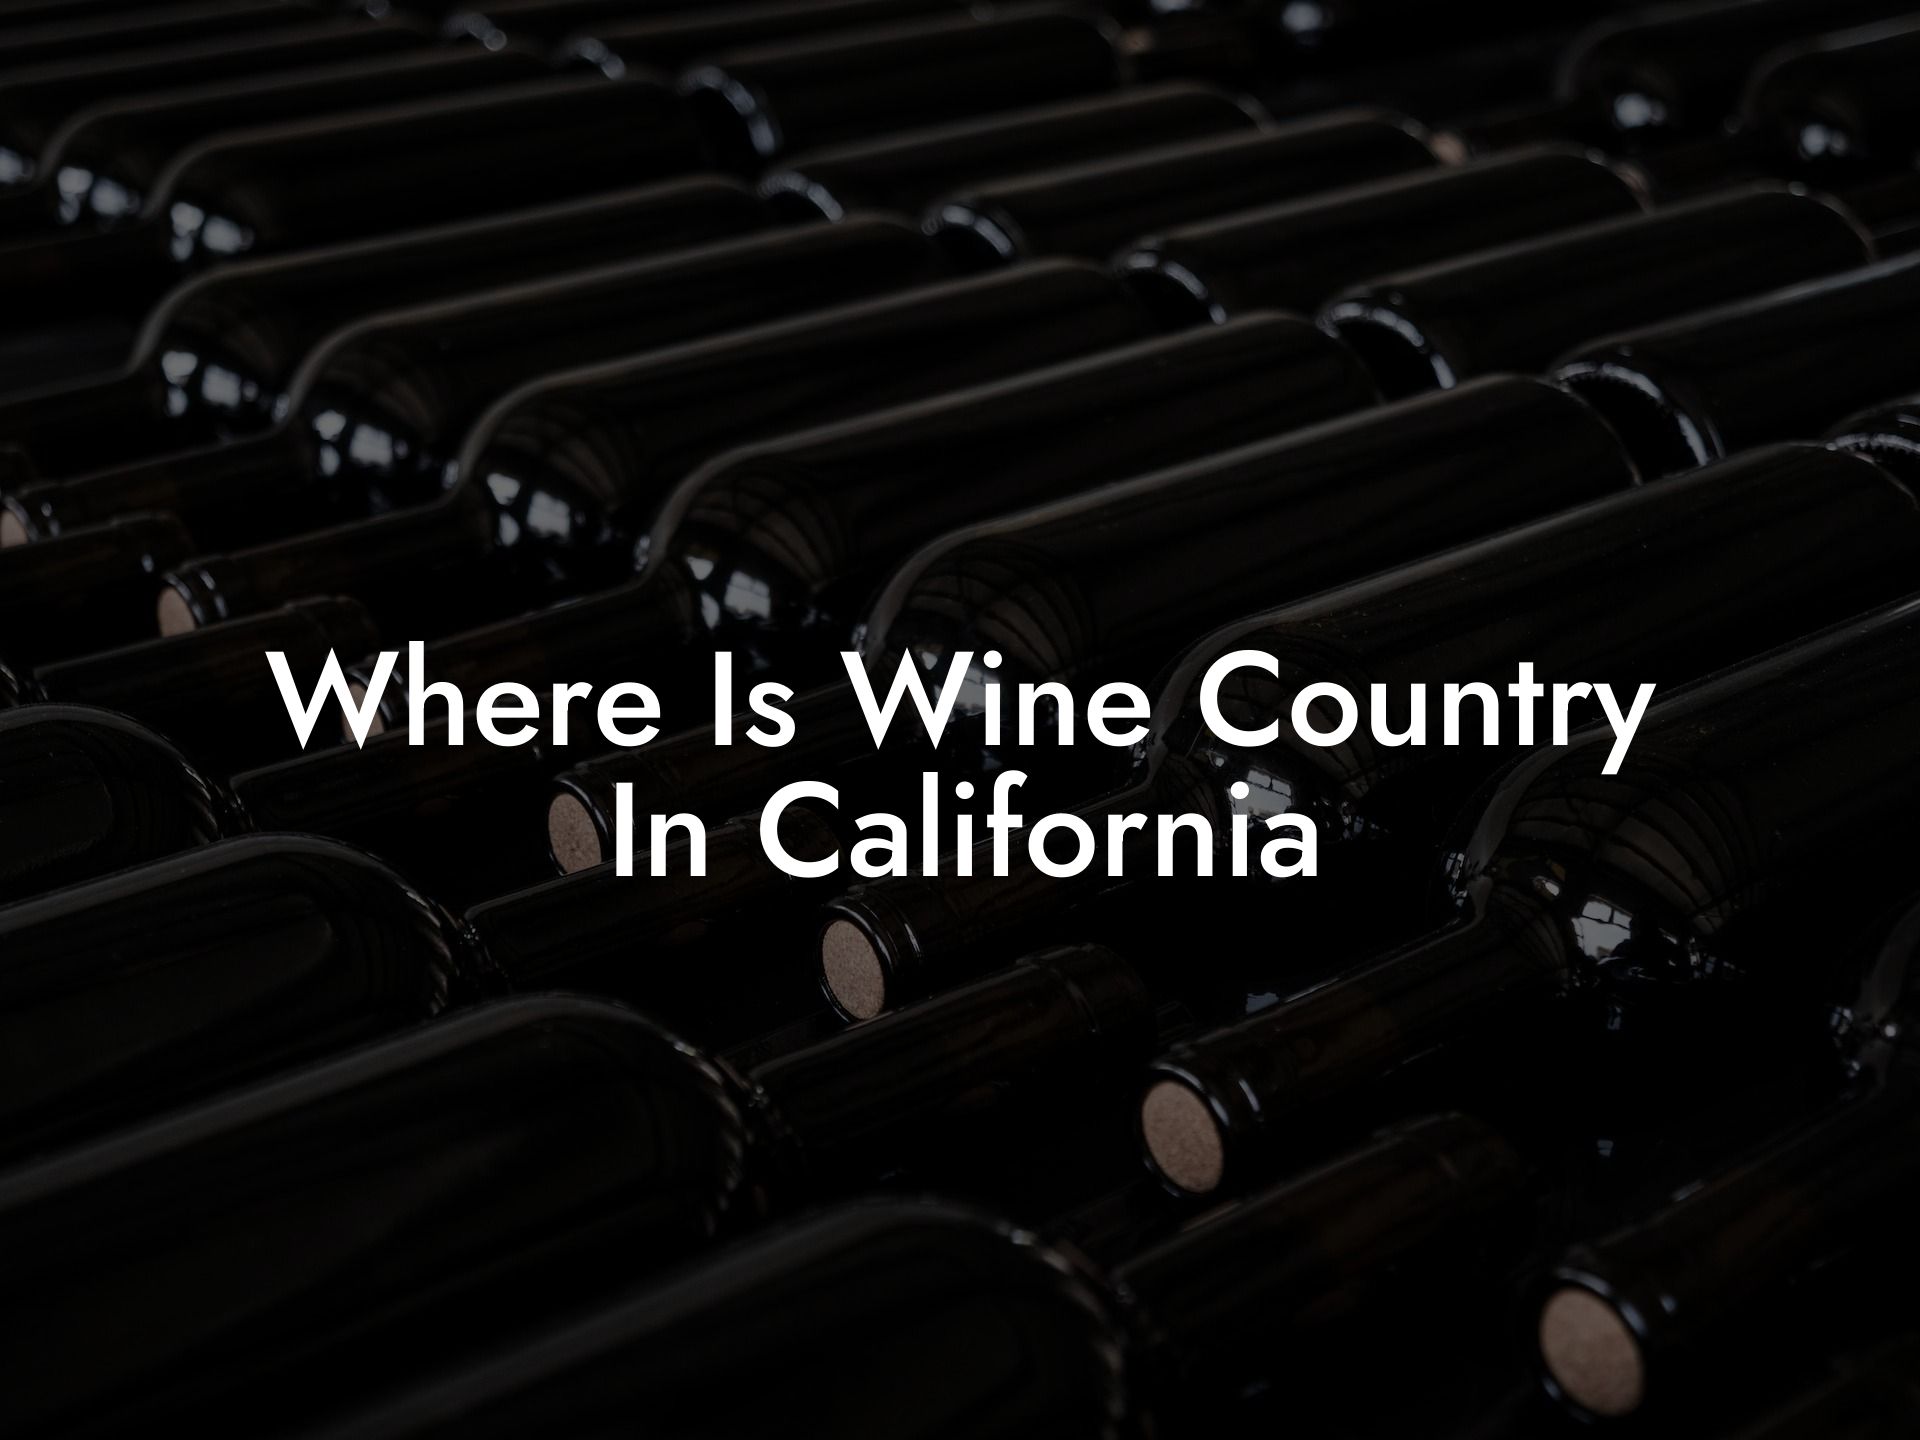 Where Is Wine Country In California